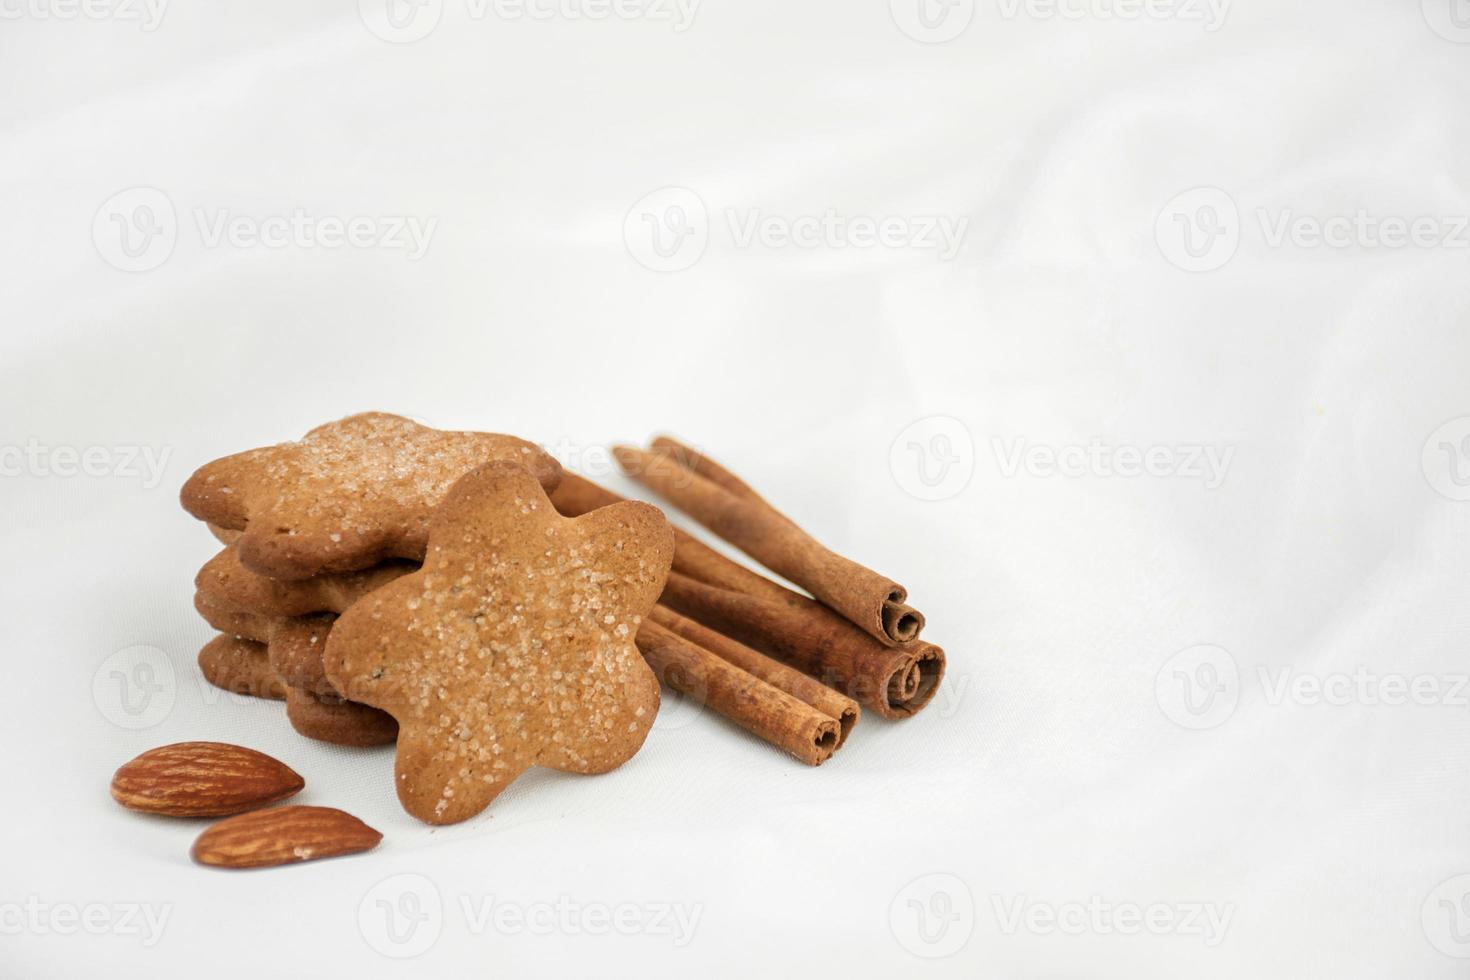 Ginger star cookies with sugar, cinnamon and almonds on a white blurred background. Christmas recipe photo